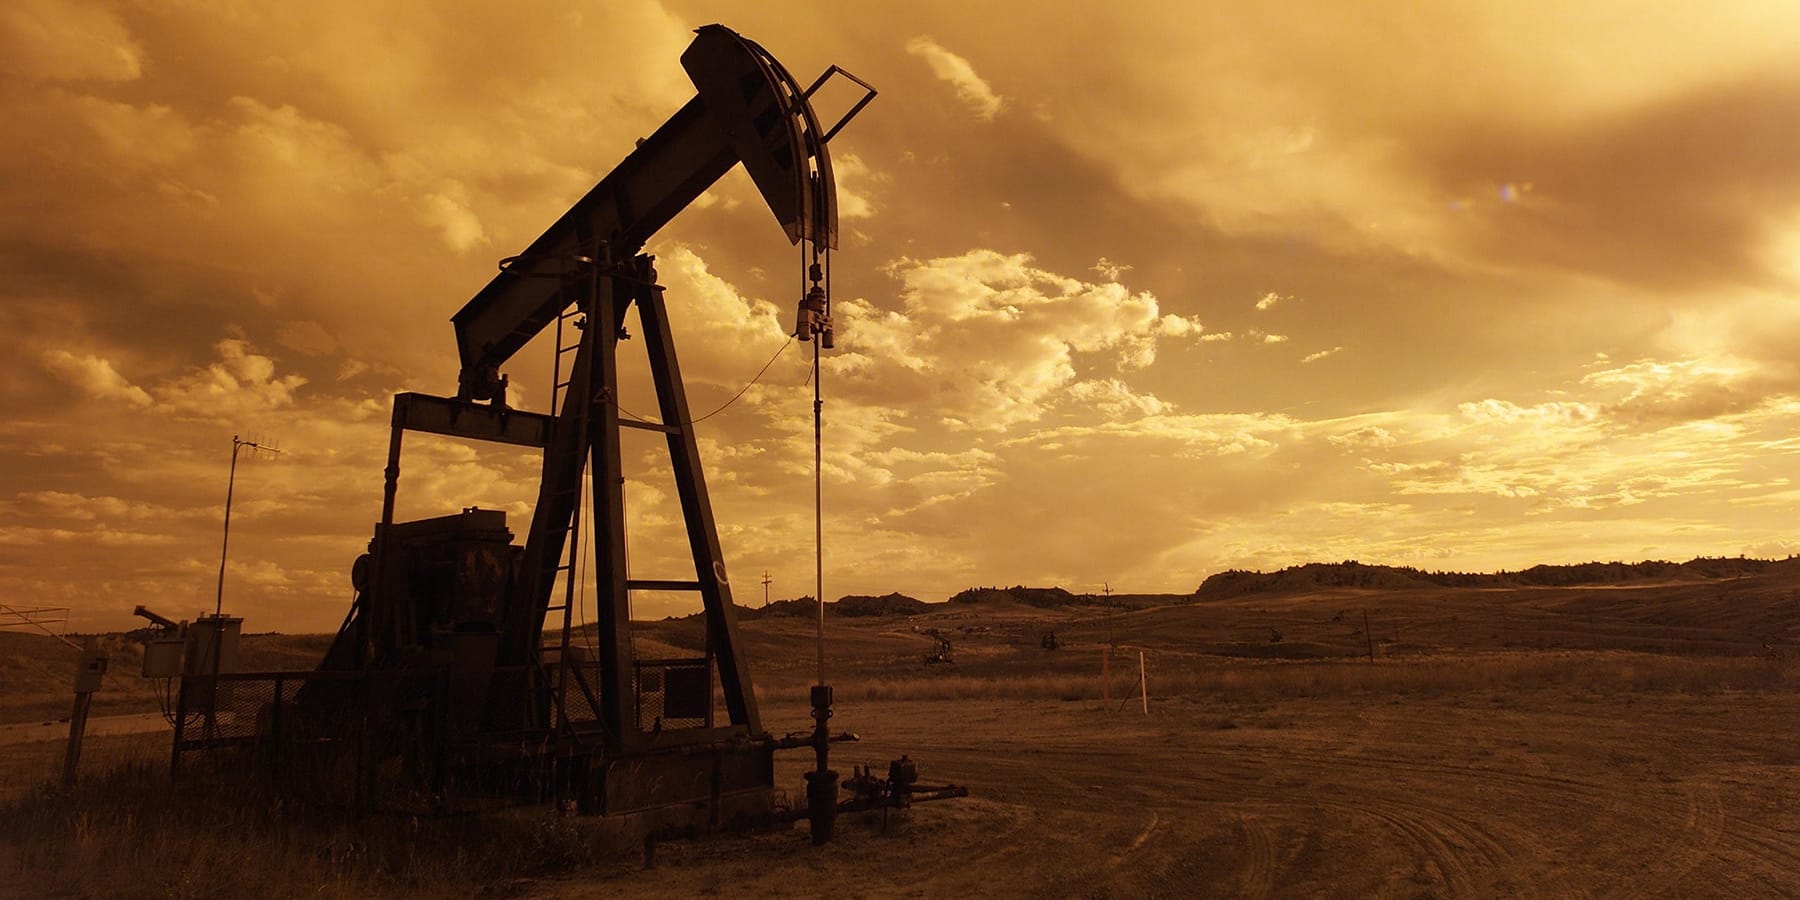 BTuff Magazine Interview: Attorney Matt Clark and the importance of Kern County’s oil industry